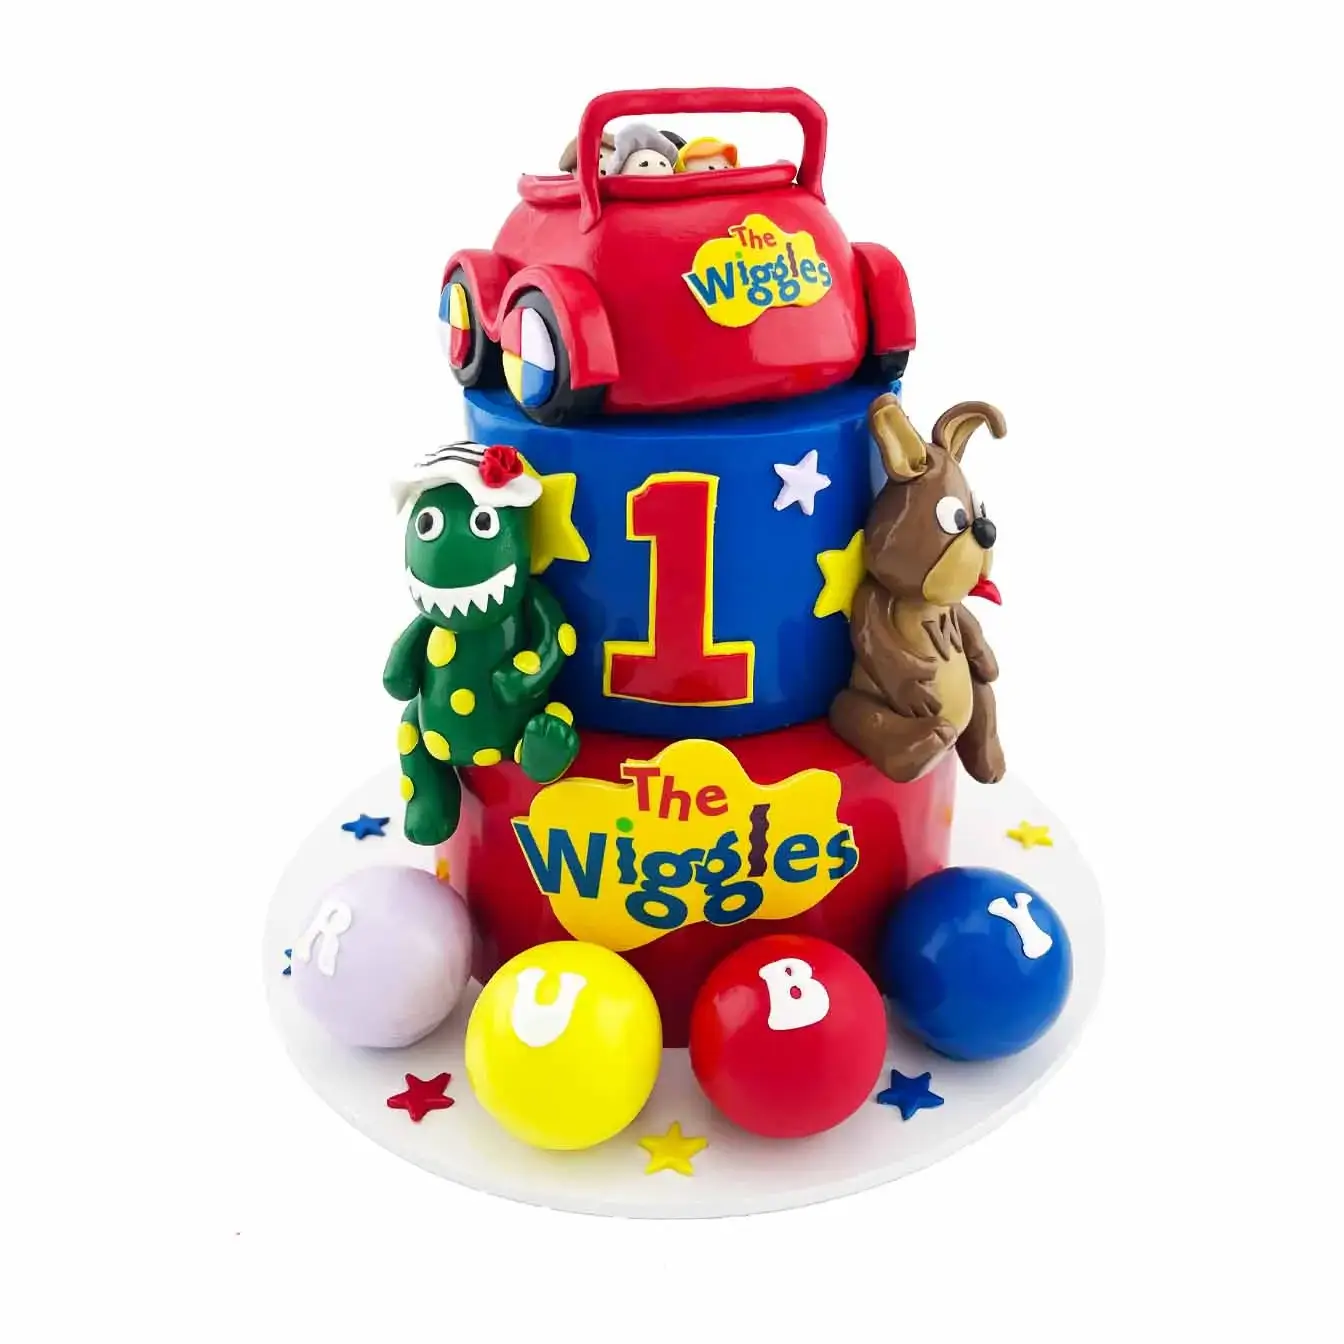 Wiggles Big Red Car Celebration Cake - A two-tier blue and red iced cake with a moulded Big Red Car, Wiggles logo, cutout stars, Dorothy the Dinosaur, Wags the Dog, colored balls, and personalized name, a delightful centerpiece for a Wiggles-themed celebration.